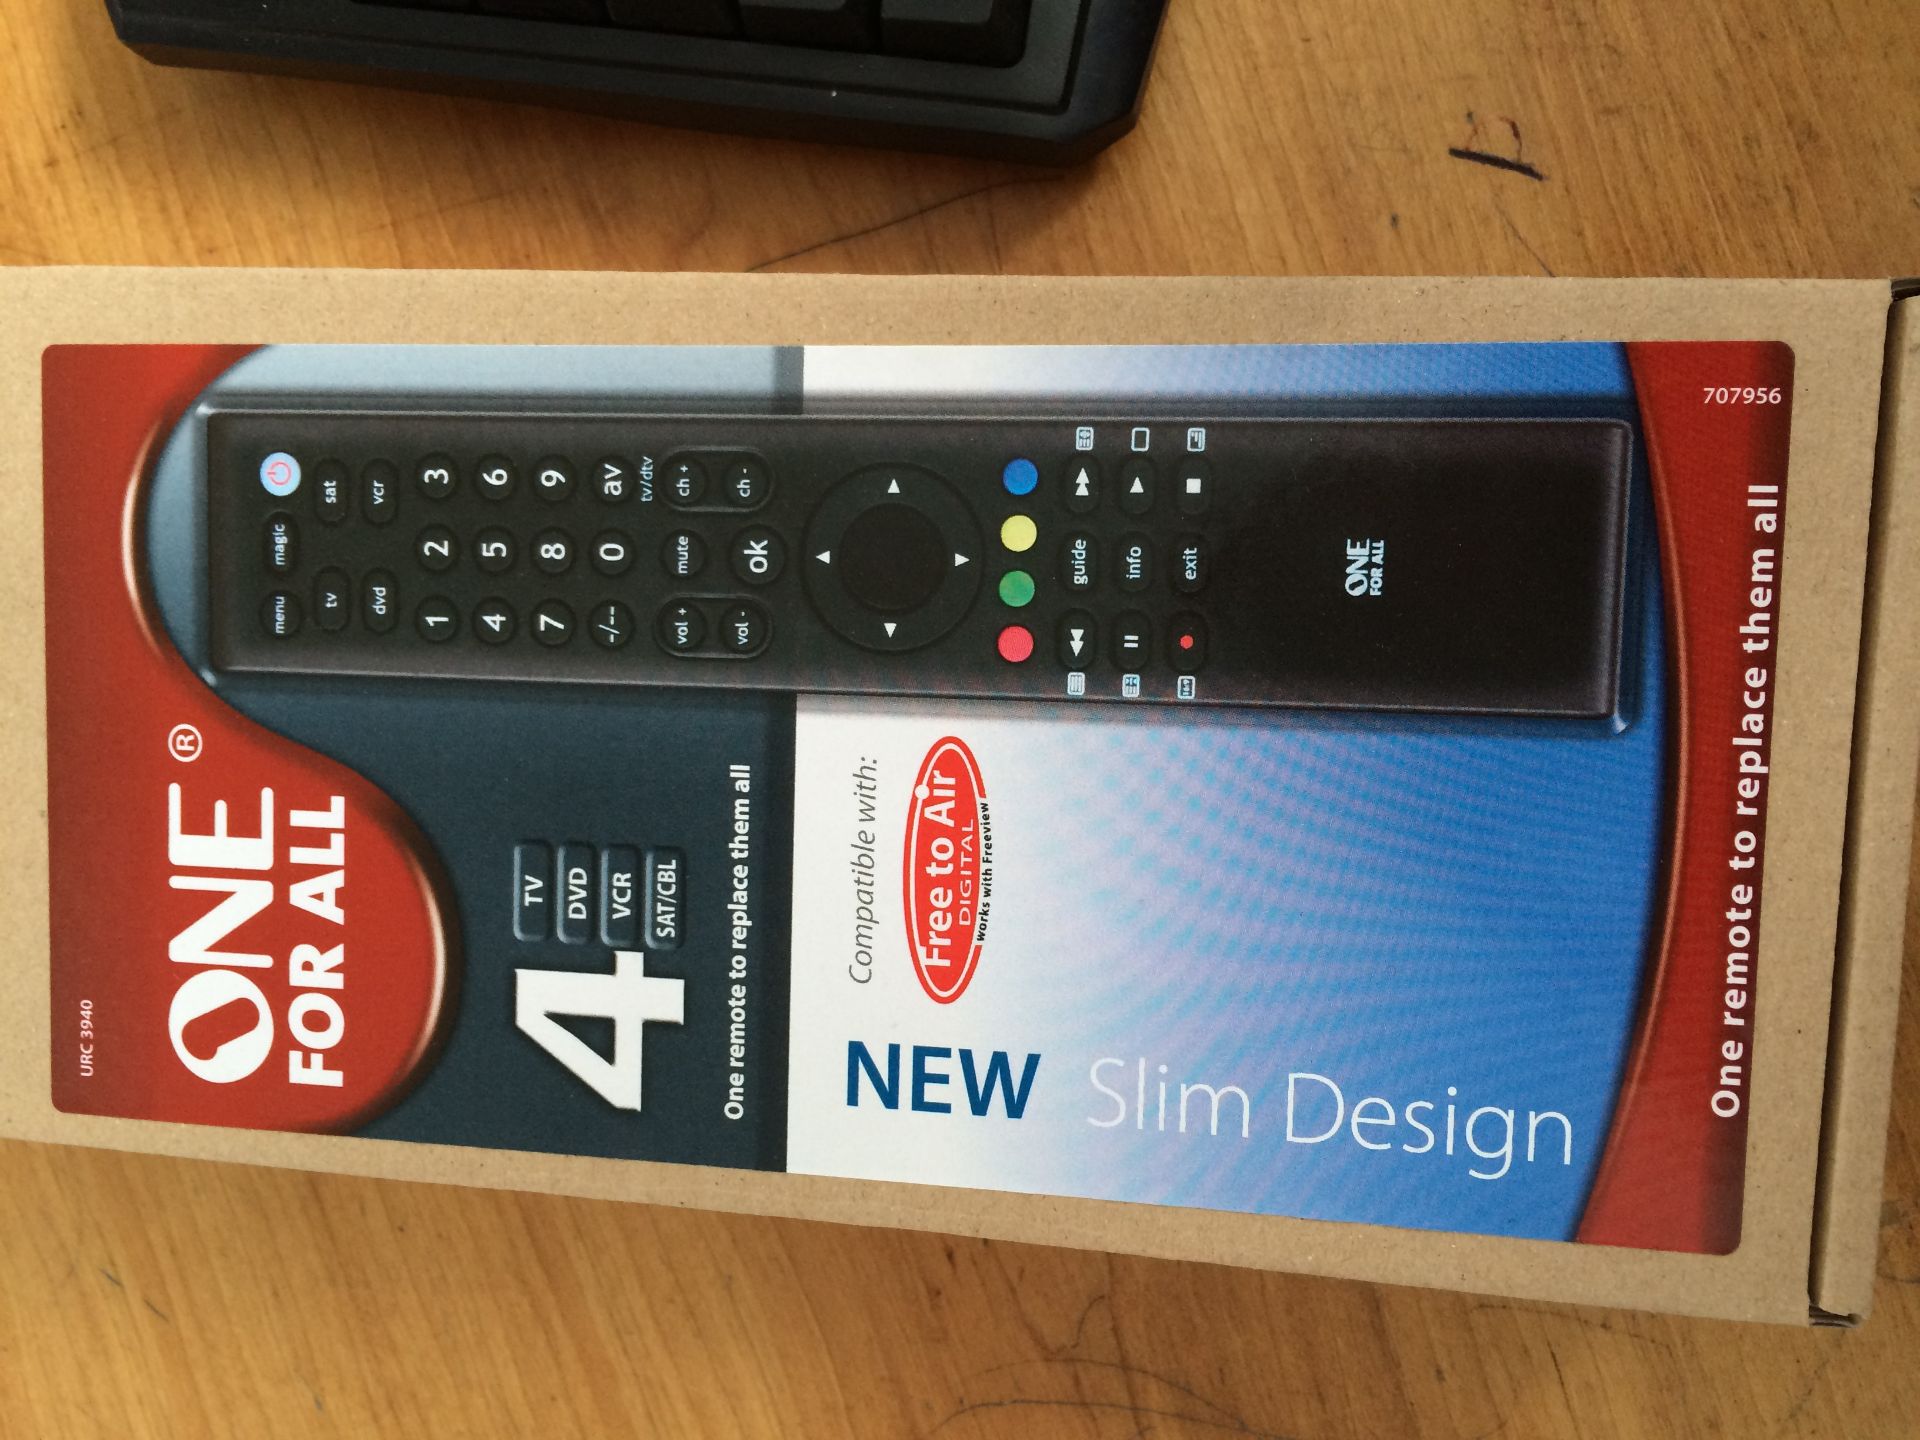 V Brand New Remote Control suitable for TV/DVD/VCR/ SAT. Cable/ 2xAA Battery Included - NOTE: Item - Image 2 of 2